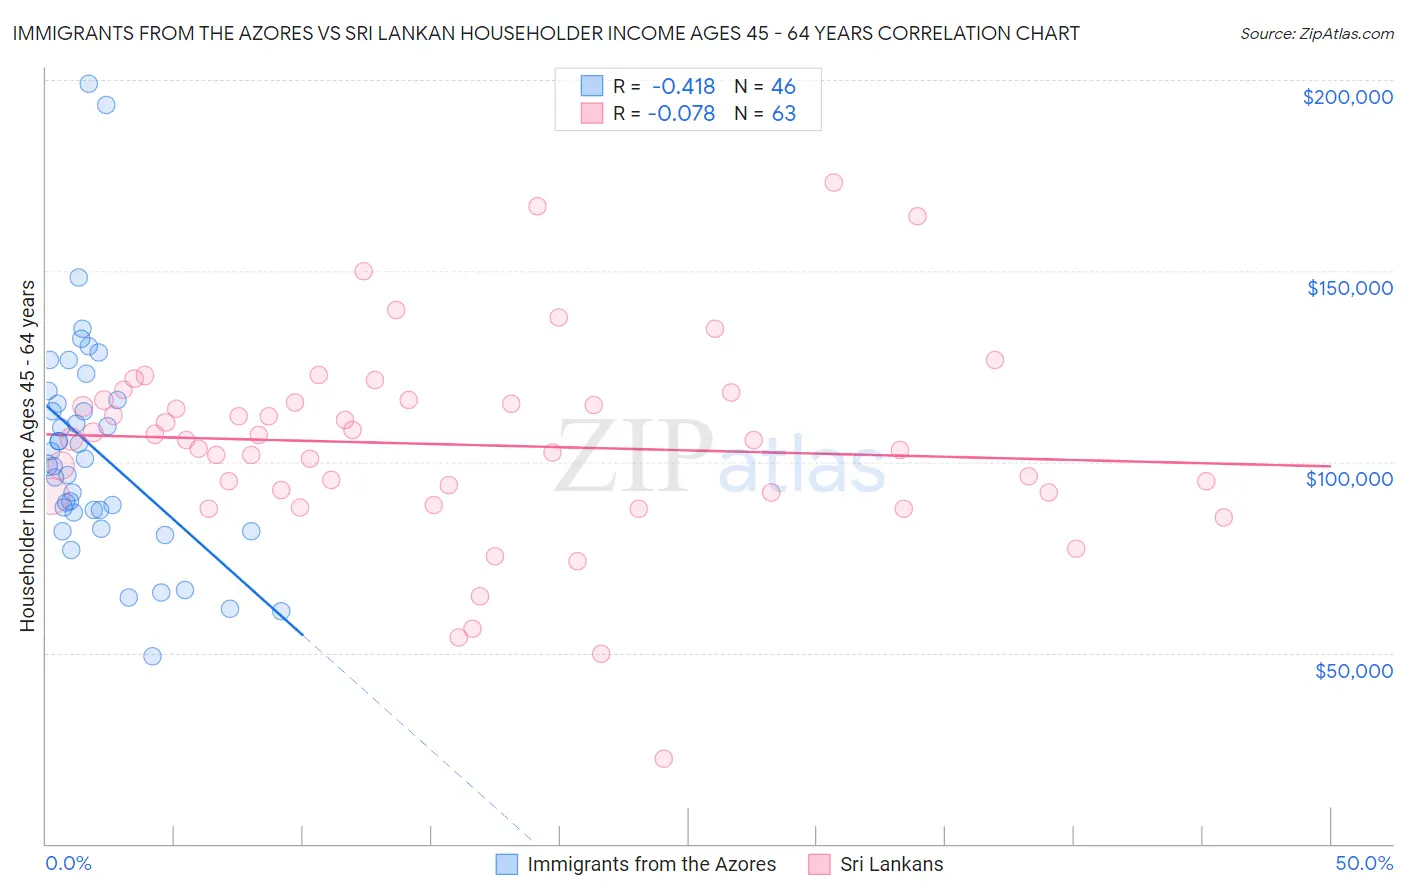 Immigrants from the Azores vs Sri Lankan Householder Income Ages 45 - 64 years